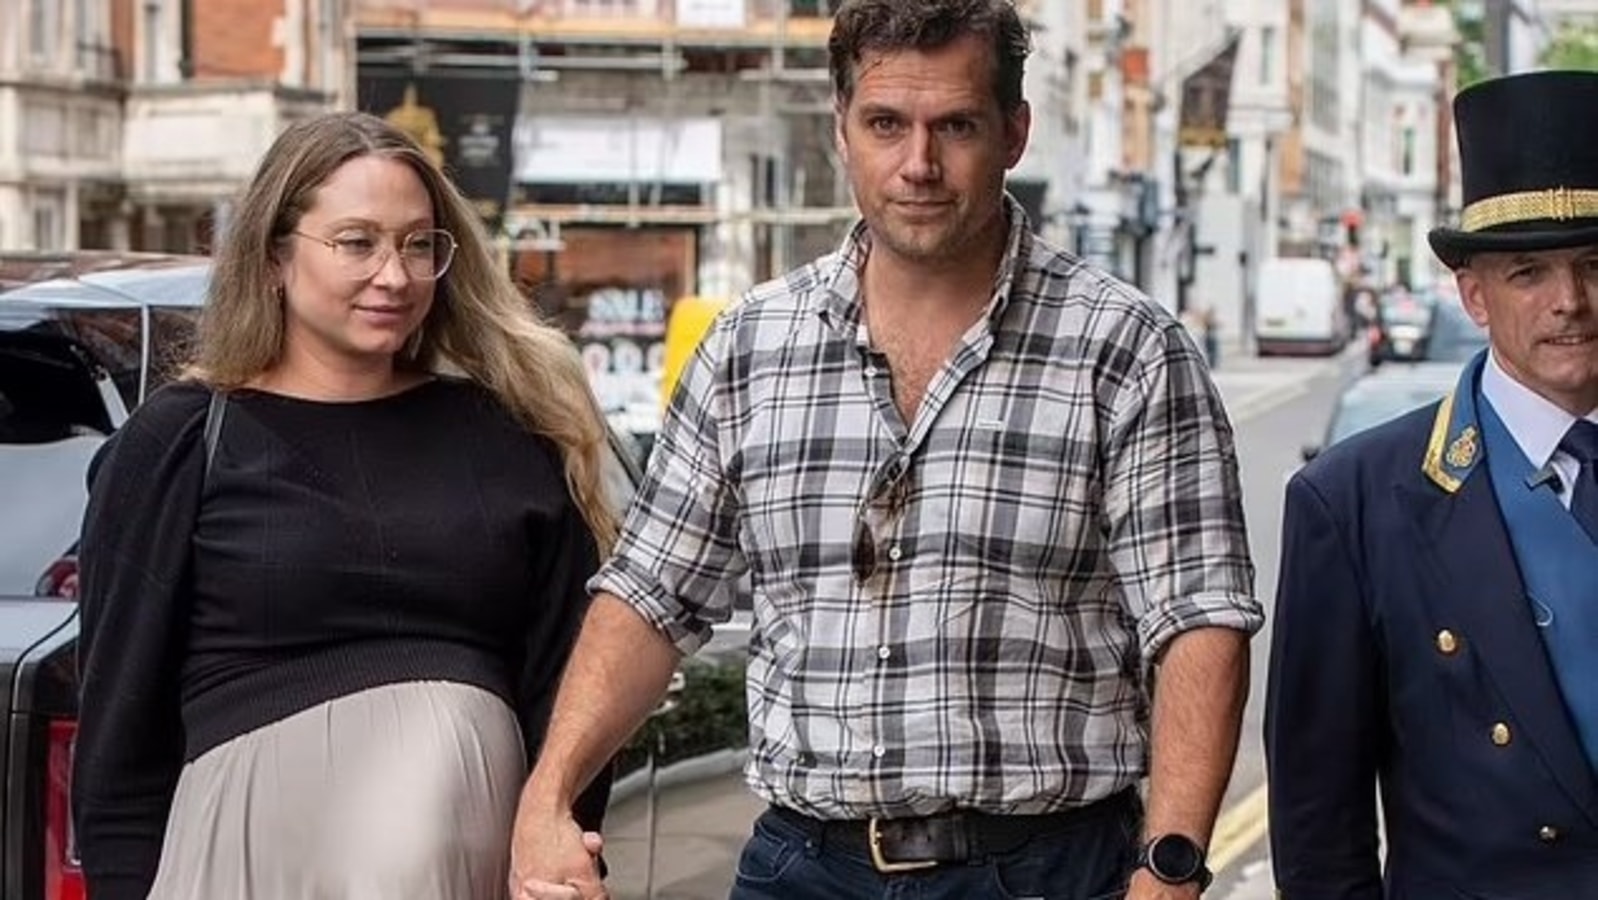 Henry Cavill, pregnant girlfriend Natalie Viscuso hold hands during walk in London. See pics